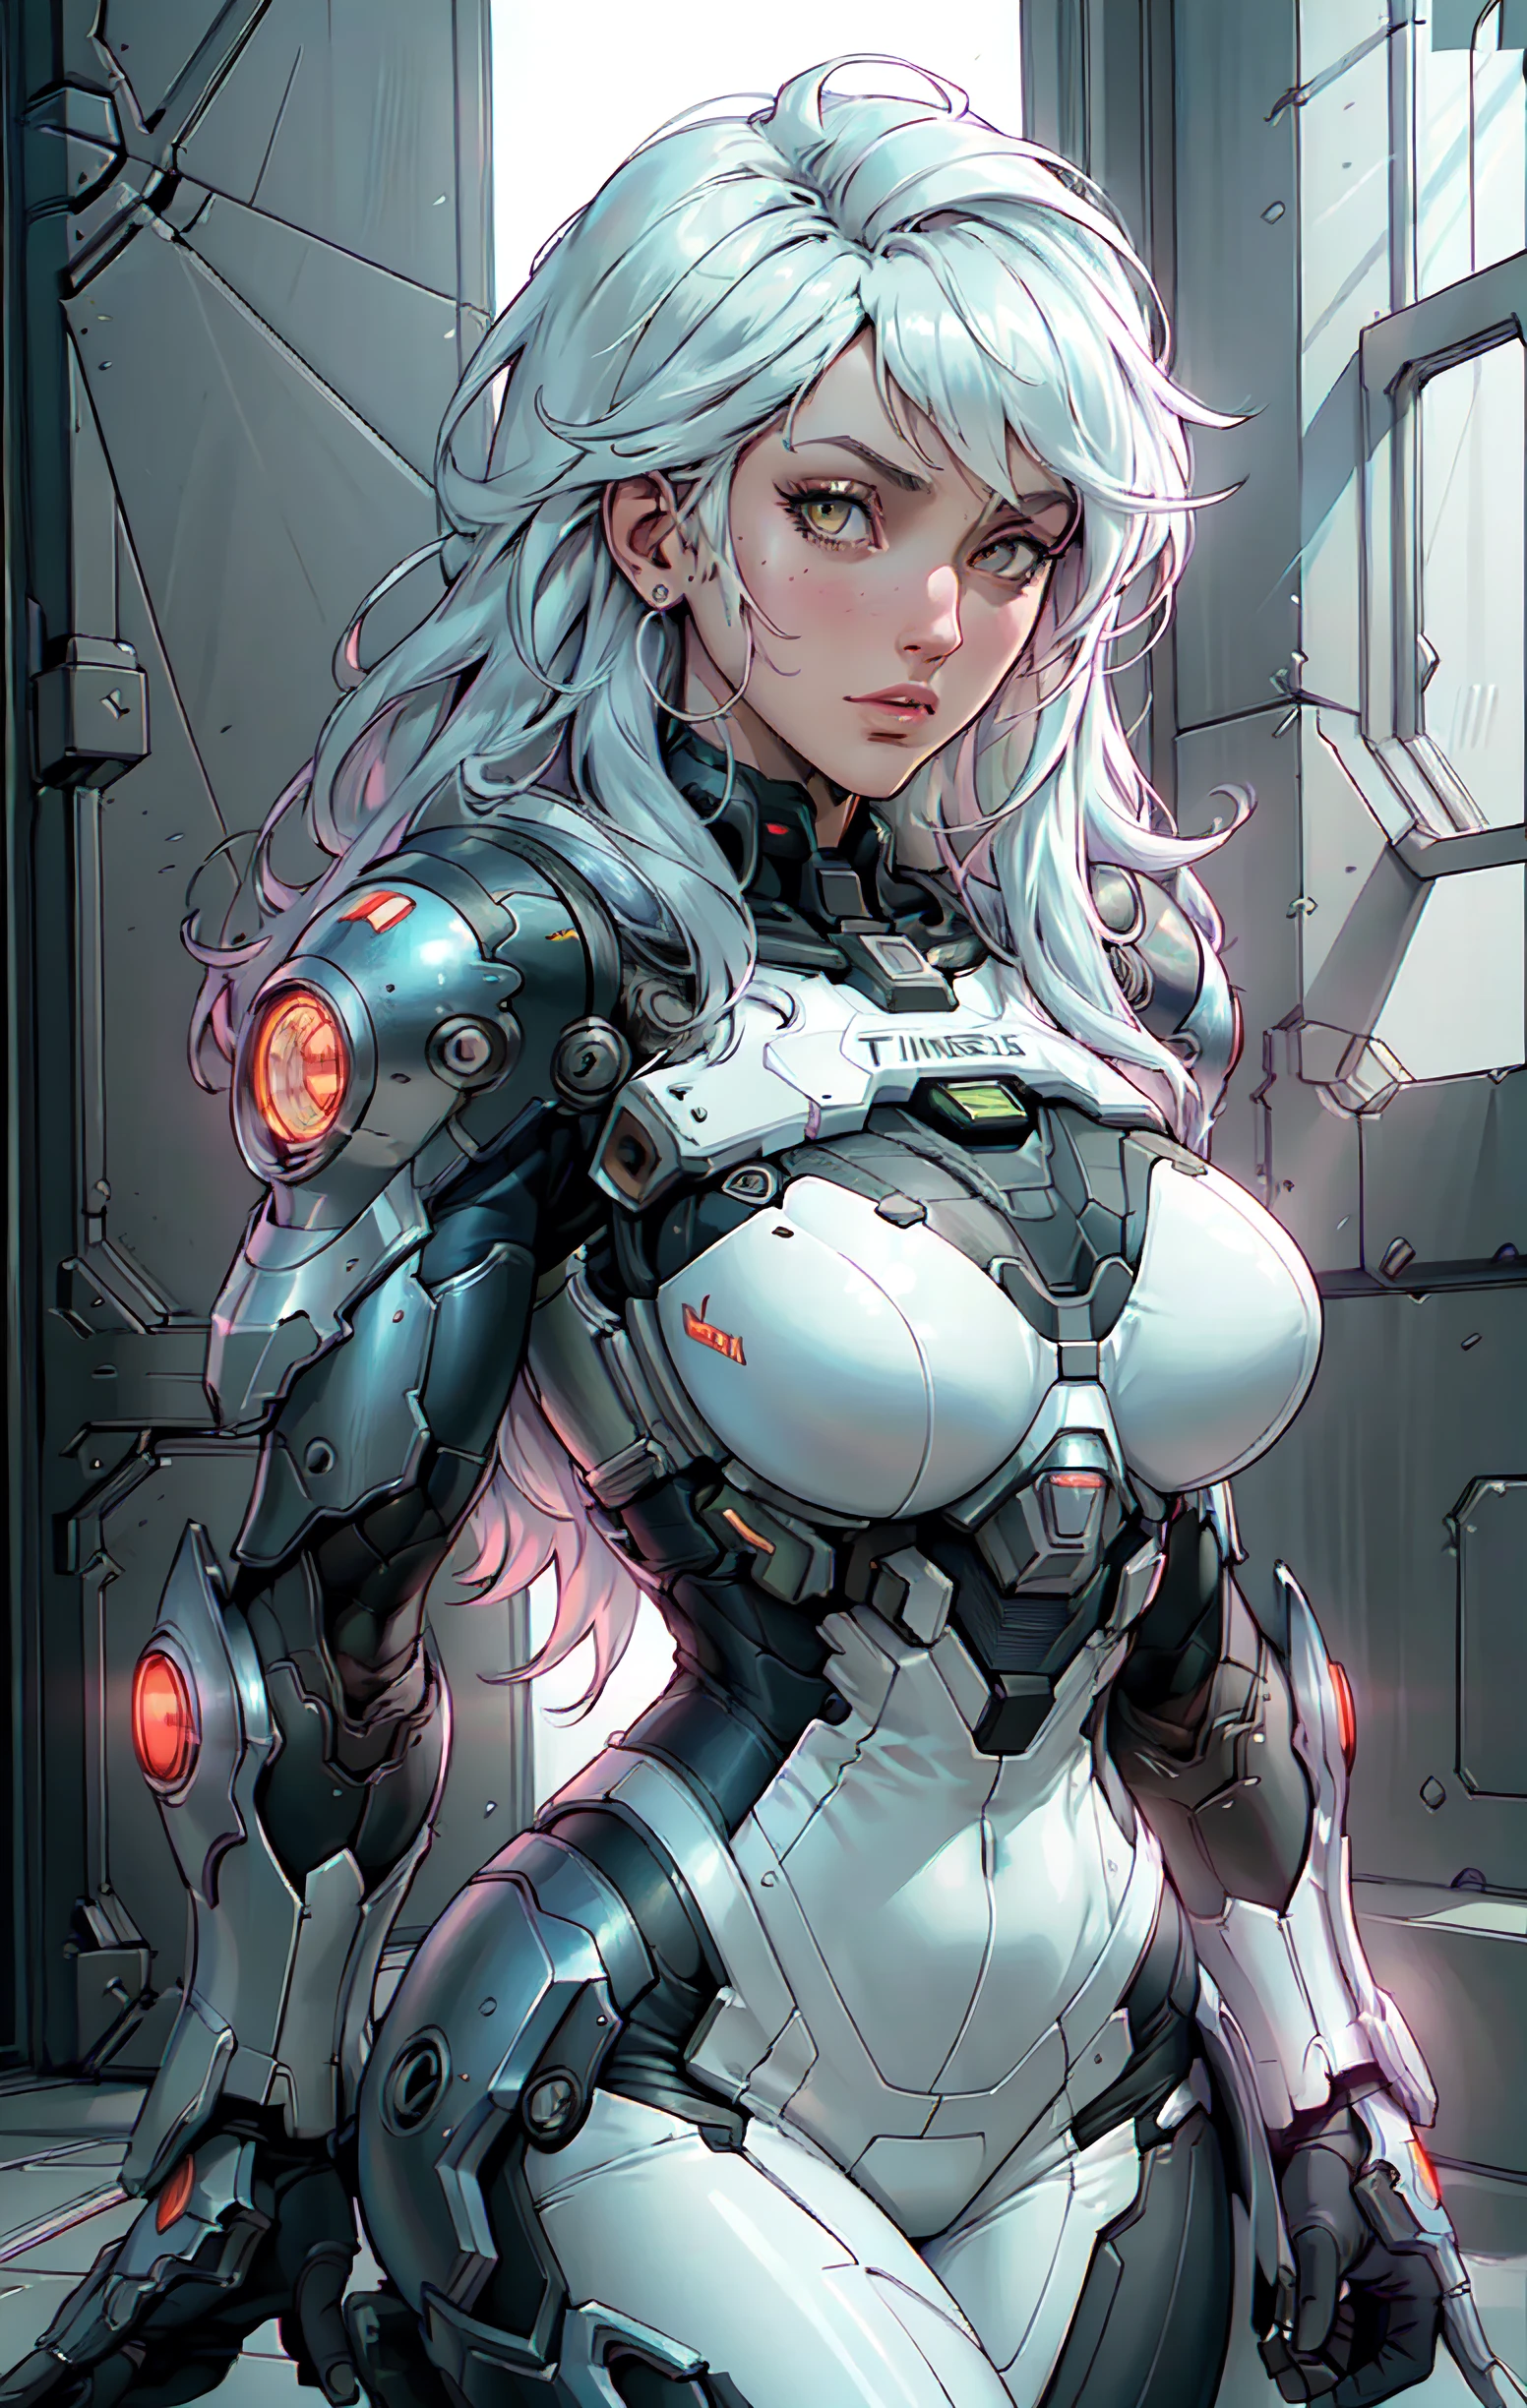 (comic style), (colored line art:1.5), ((Best quality)), ((masterpiece)), (detailed:1.4), 3D, an image of a beautiful cyberpunk female,HDR (High Dynamic Range),Ray Tracing,NVIDIA RTX,Super-Resolution,Unreal 5,Subsurface scattering,PBR Texturing,Post-processing,Anisotropic Filtering,Depth-of-field,Maximum clarity and sharpness,Multi-layered textures,Albedo and Specular maps,Surface shading,Accurate simulation of light-material interaction,Perfect proportions,Octane Render,Two-tone lighting,Wide aperture,Low ISO,White balance,Rule of thirds,8K RAW, (realistic:1.3), (mature adult:1.5), 